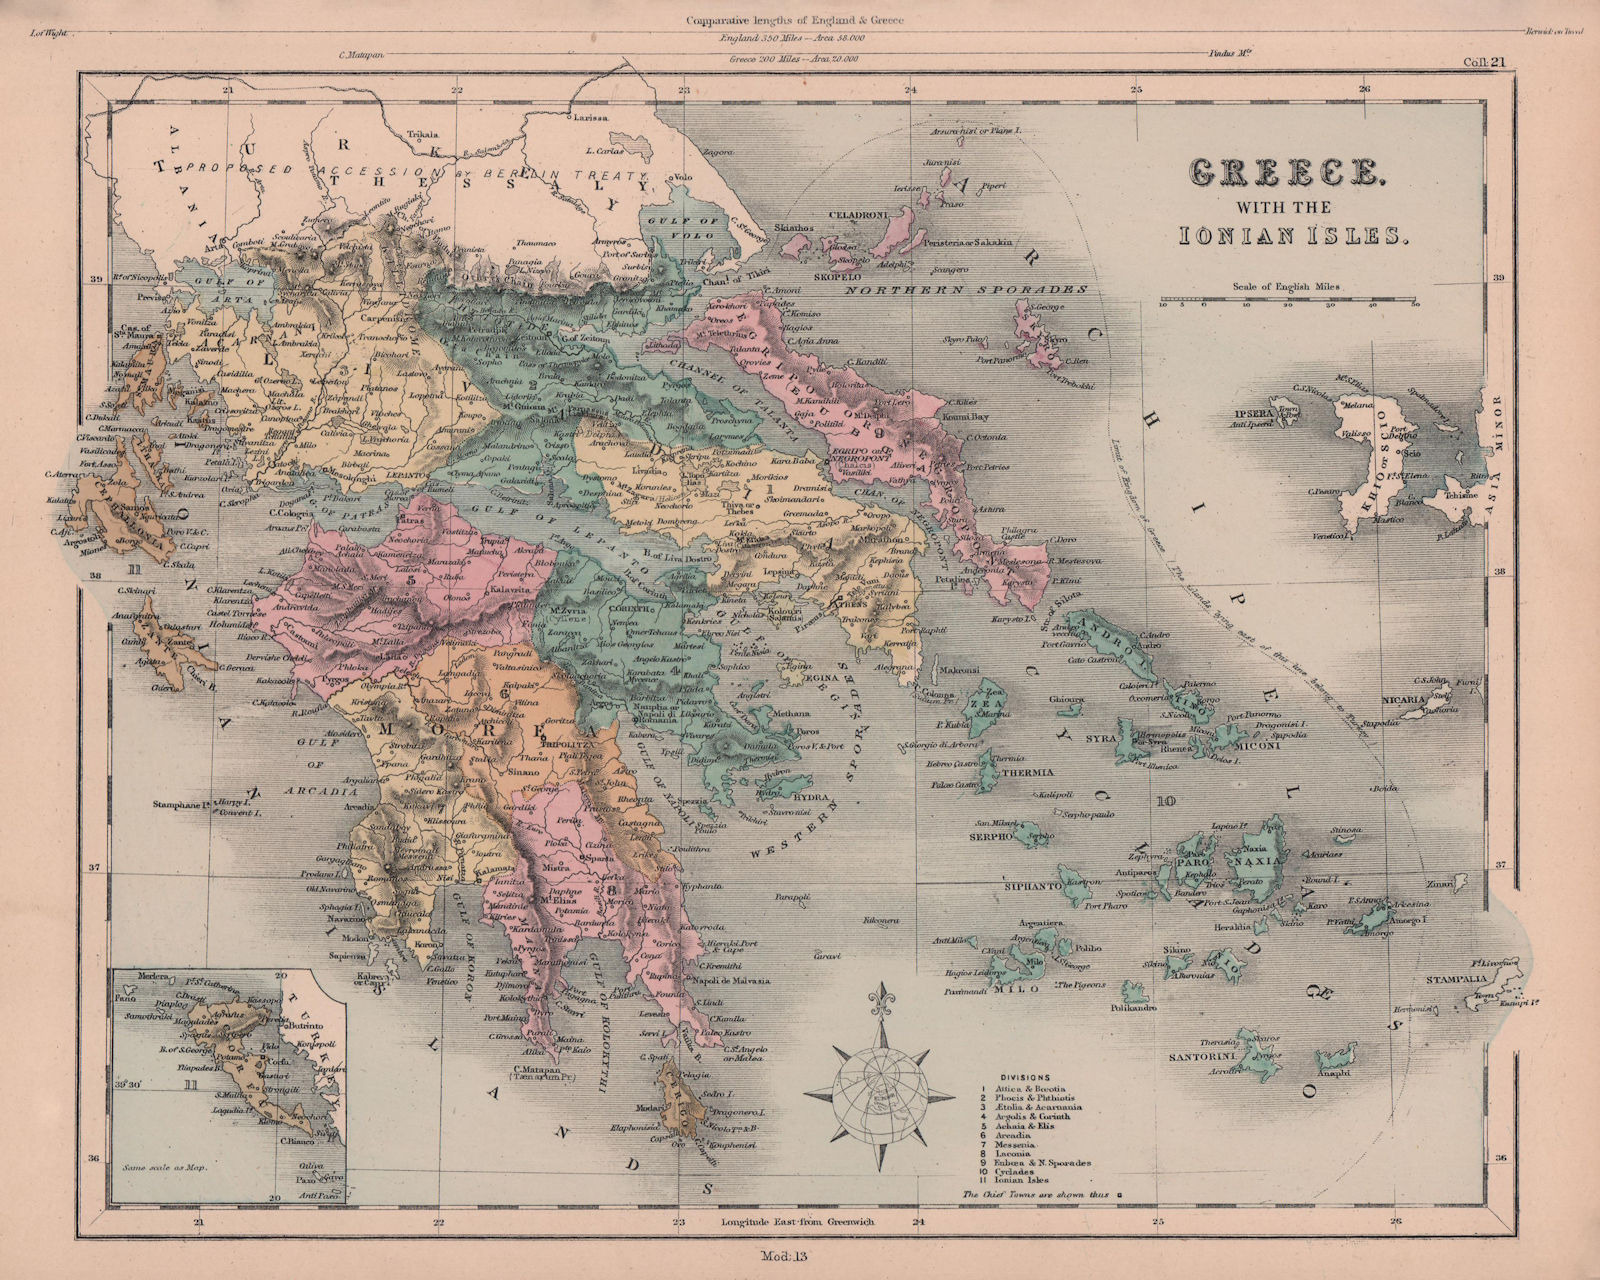 Associate Product Greece, with the Ionian Isles. Cyclades Aegean Sporades. HUGHES 1876 old map